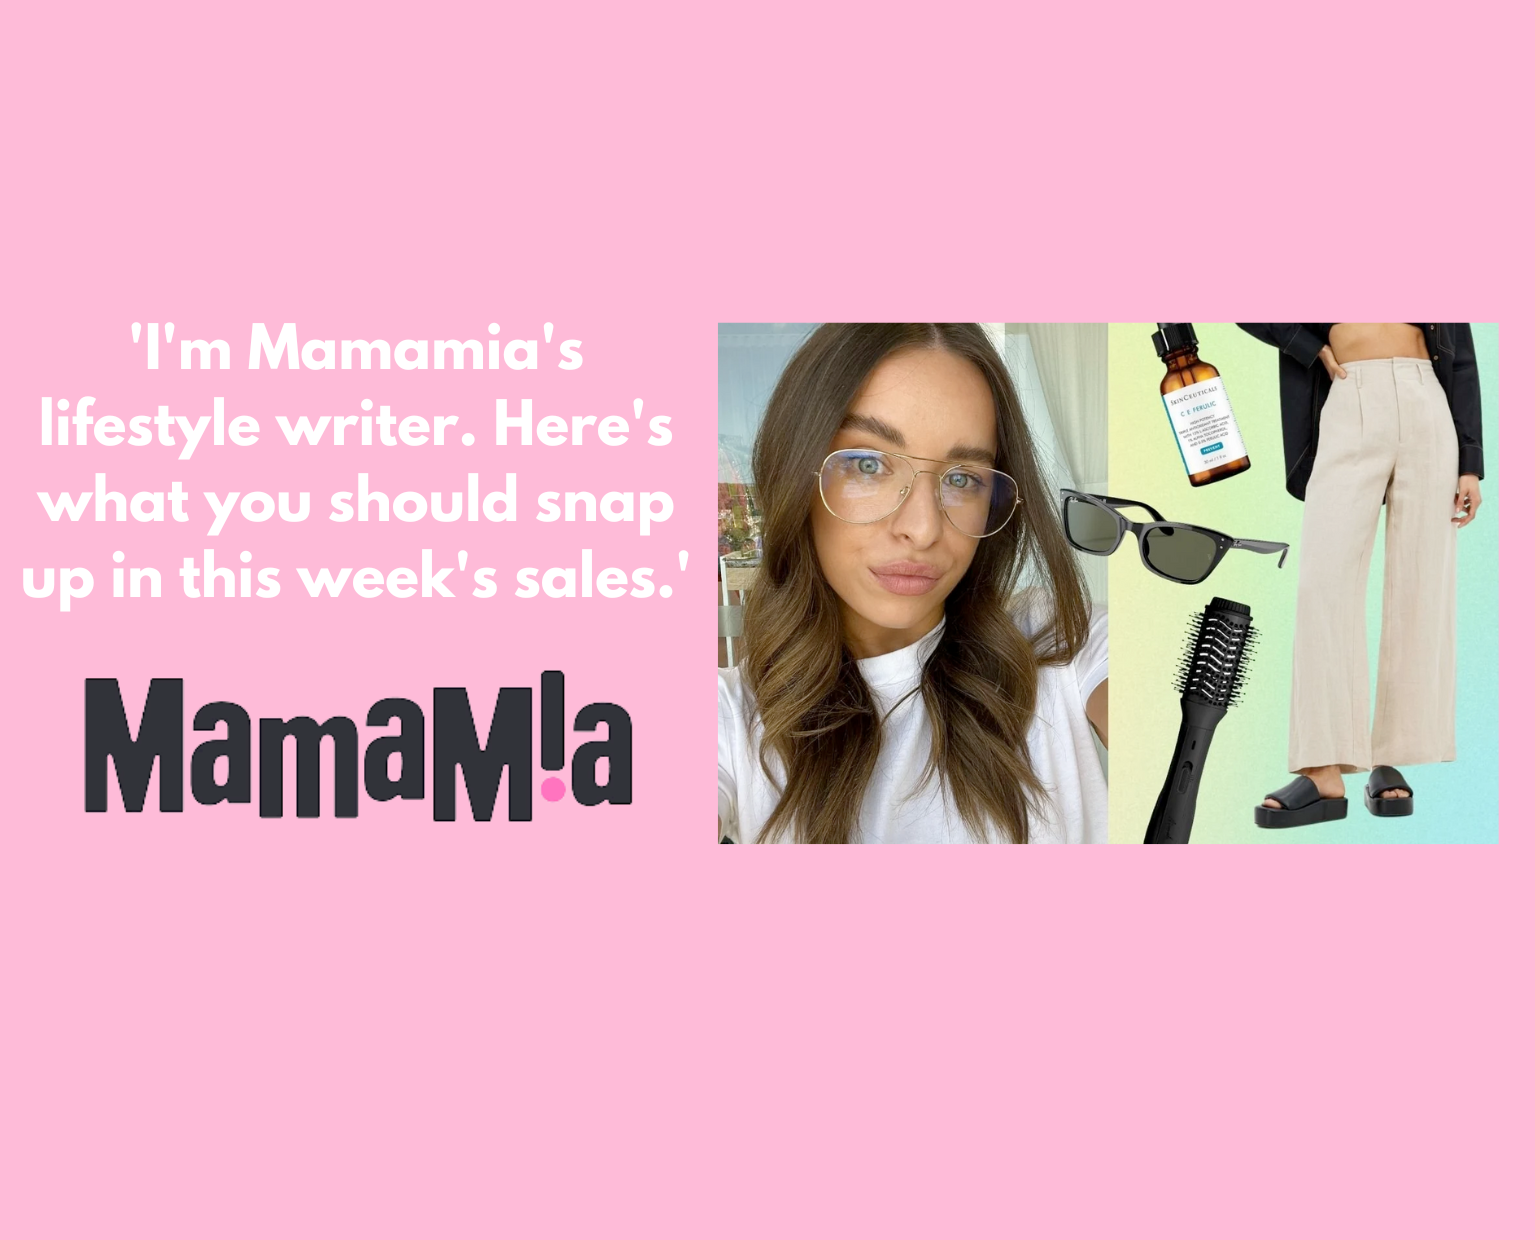 'I'm Mamamia's lifestyle writer. Here's what you should snap up in this week's sales.'